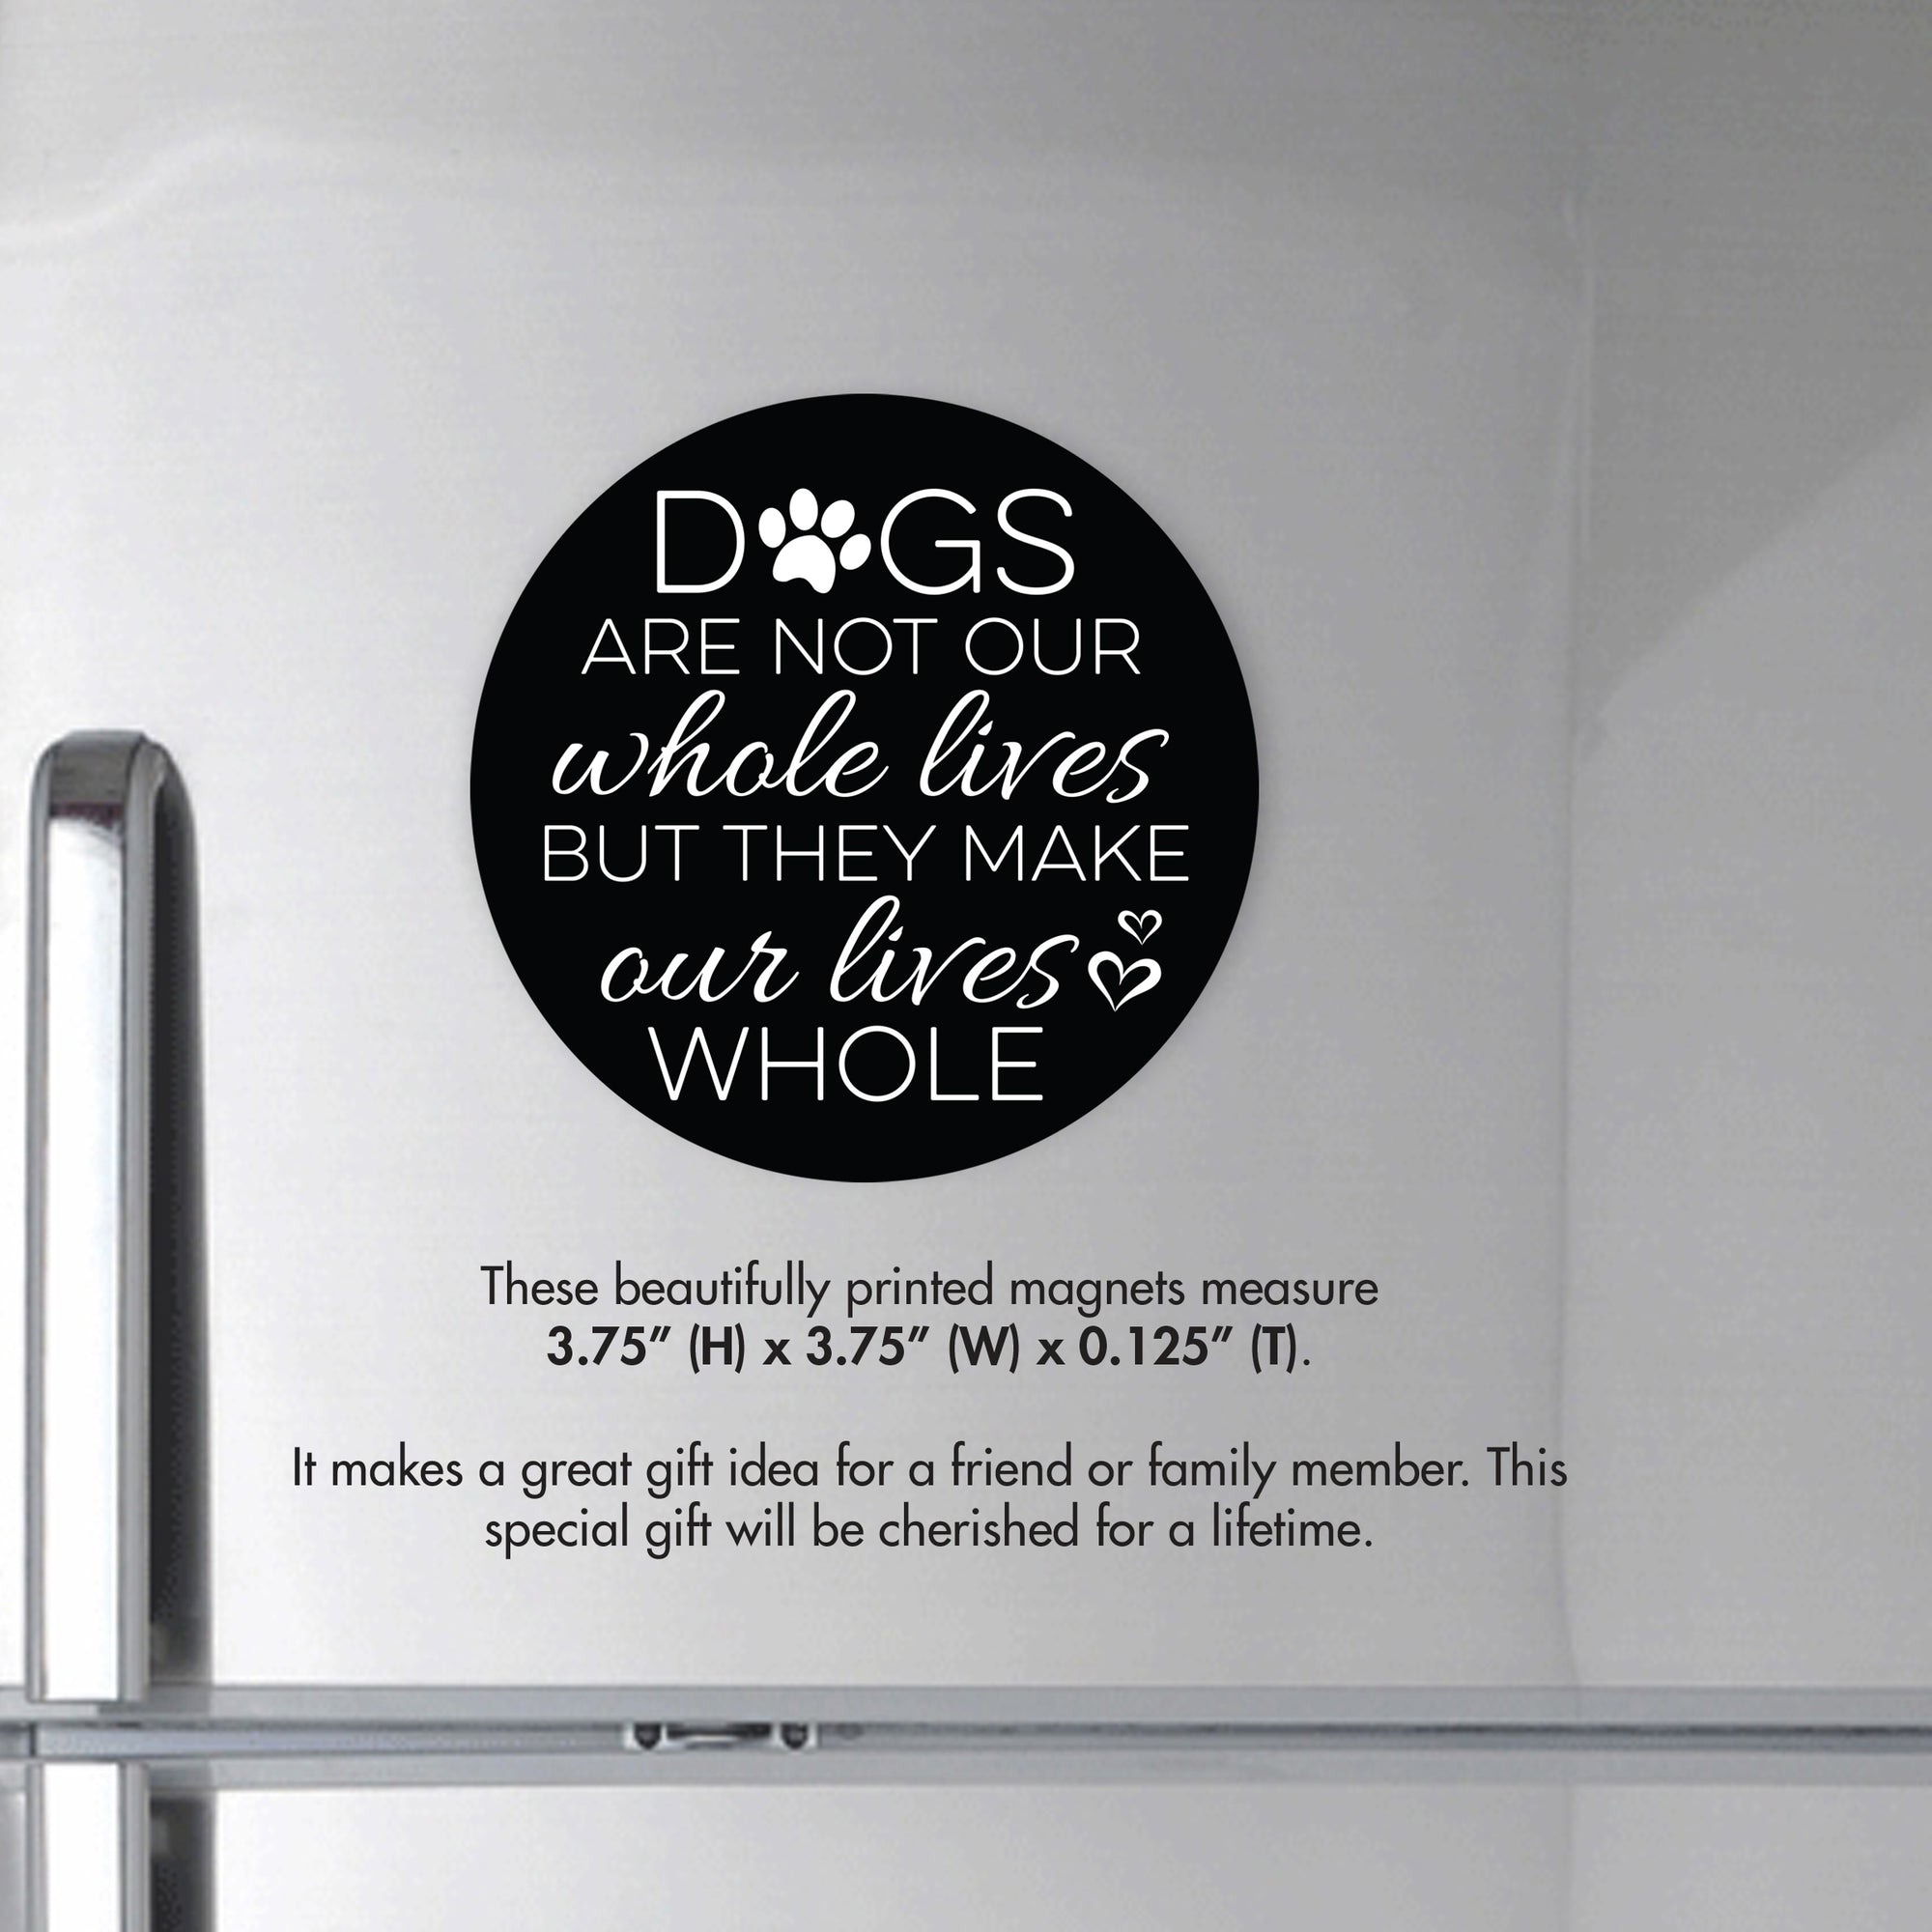 Refrigerator Magnet Perfect Gift Idea For Pet Owners - Dogs Are Not Our Whole Lives